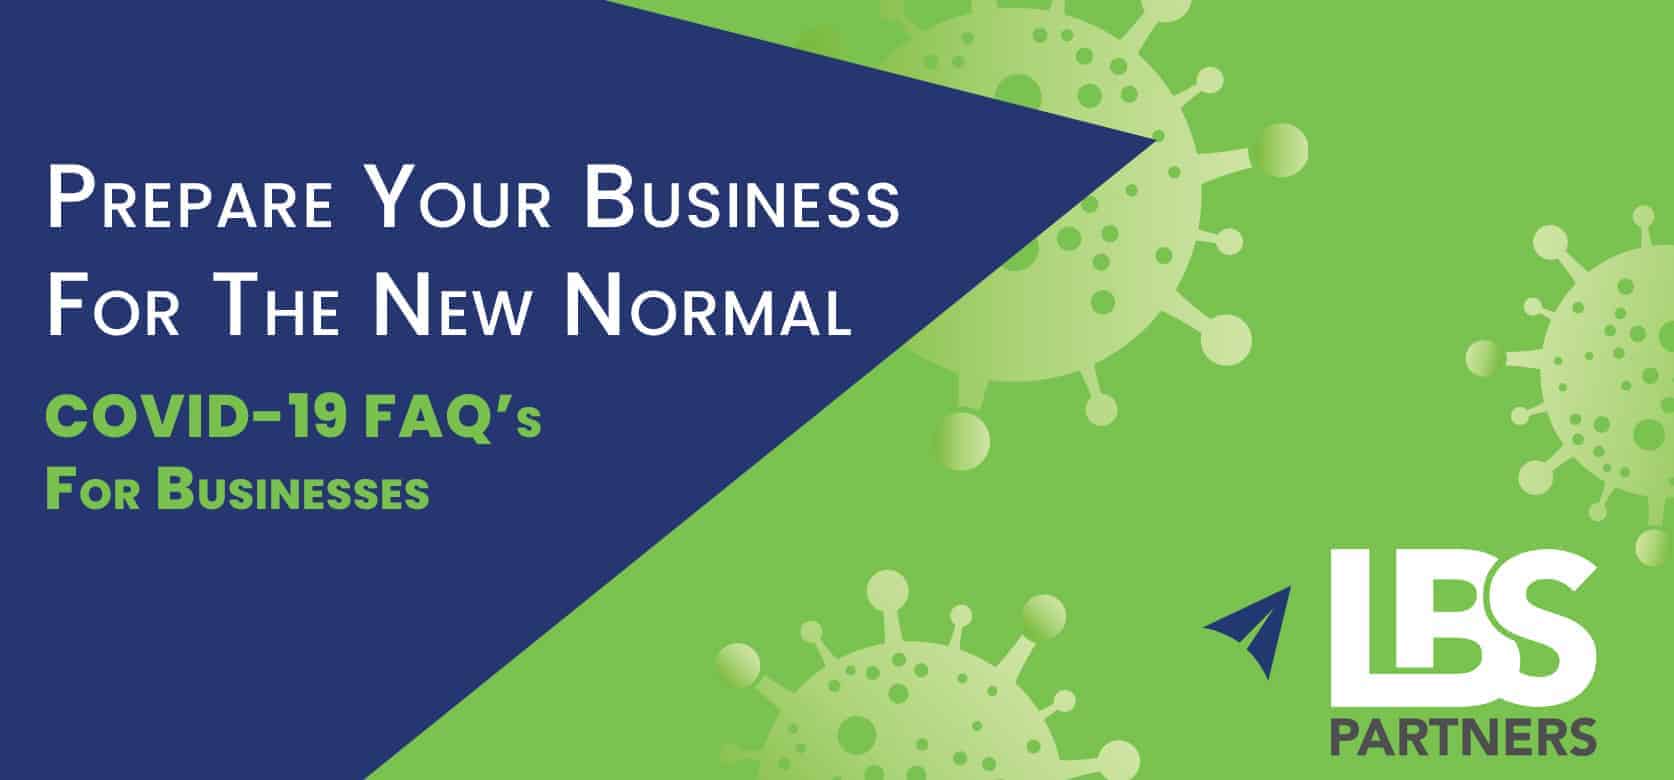 Prepare Your Business For The New Normal